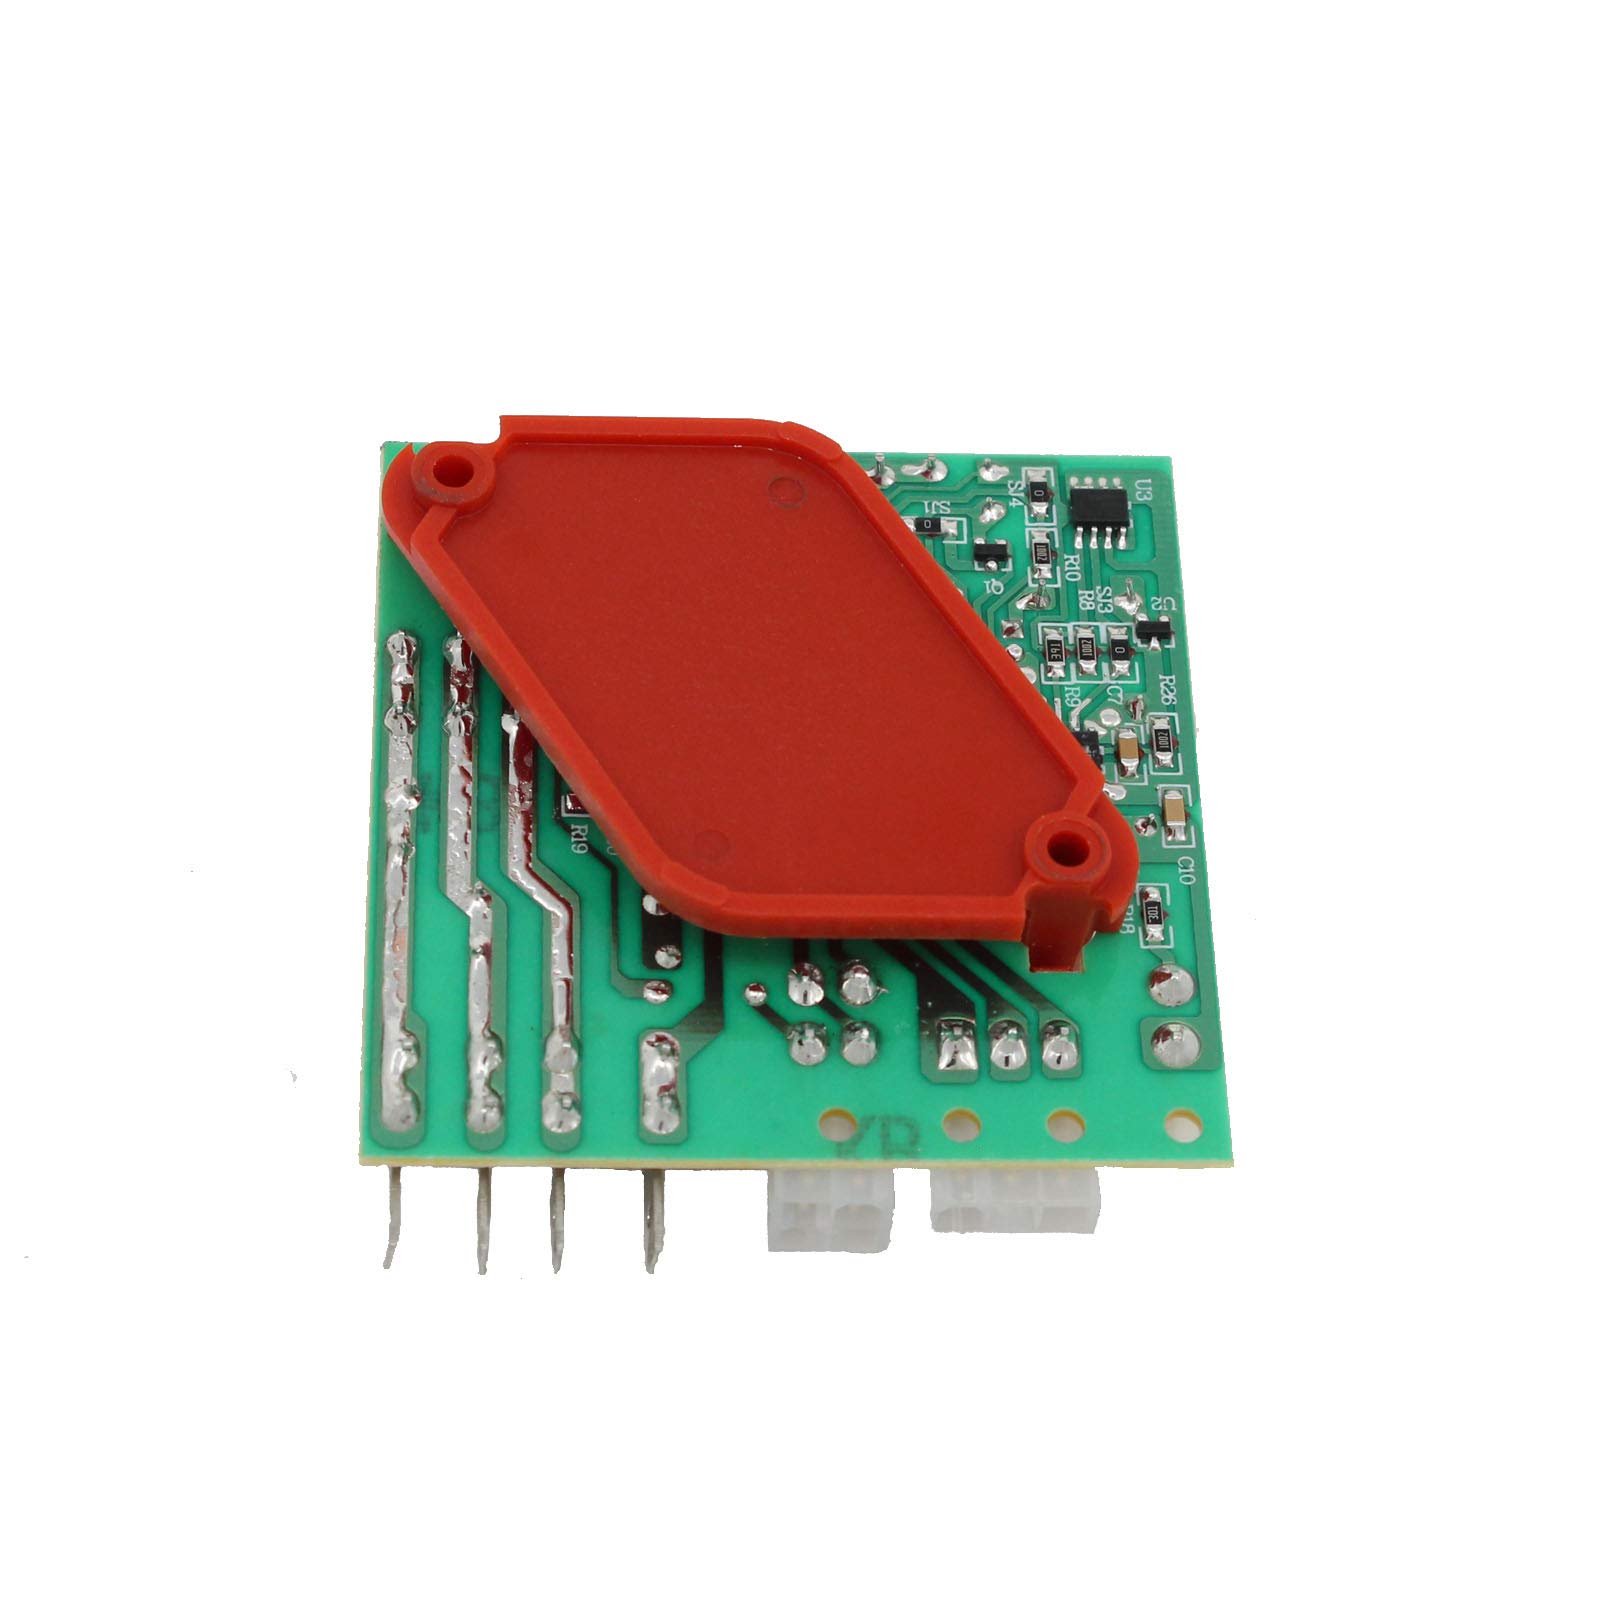 W10366605 Defrost Control Board Replacement for Whirlpool WRS325FDAW02 Refrigerator - Compatible with WPW10366605 Control Board - UpStart Components Brand